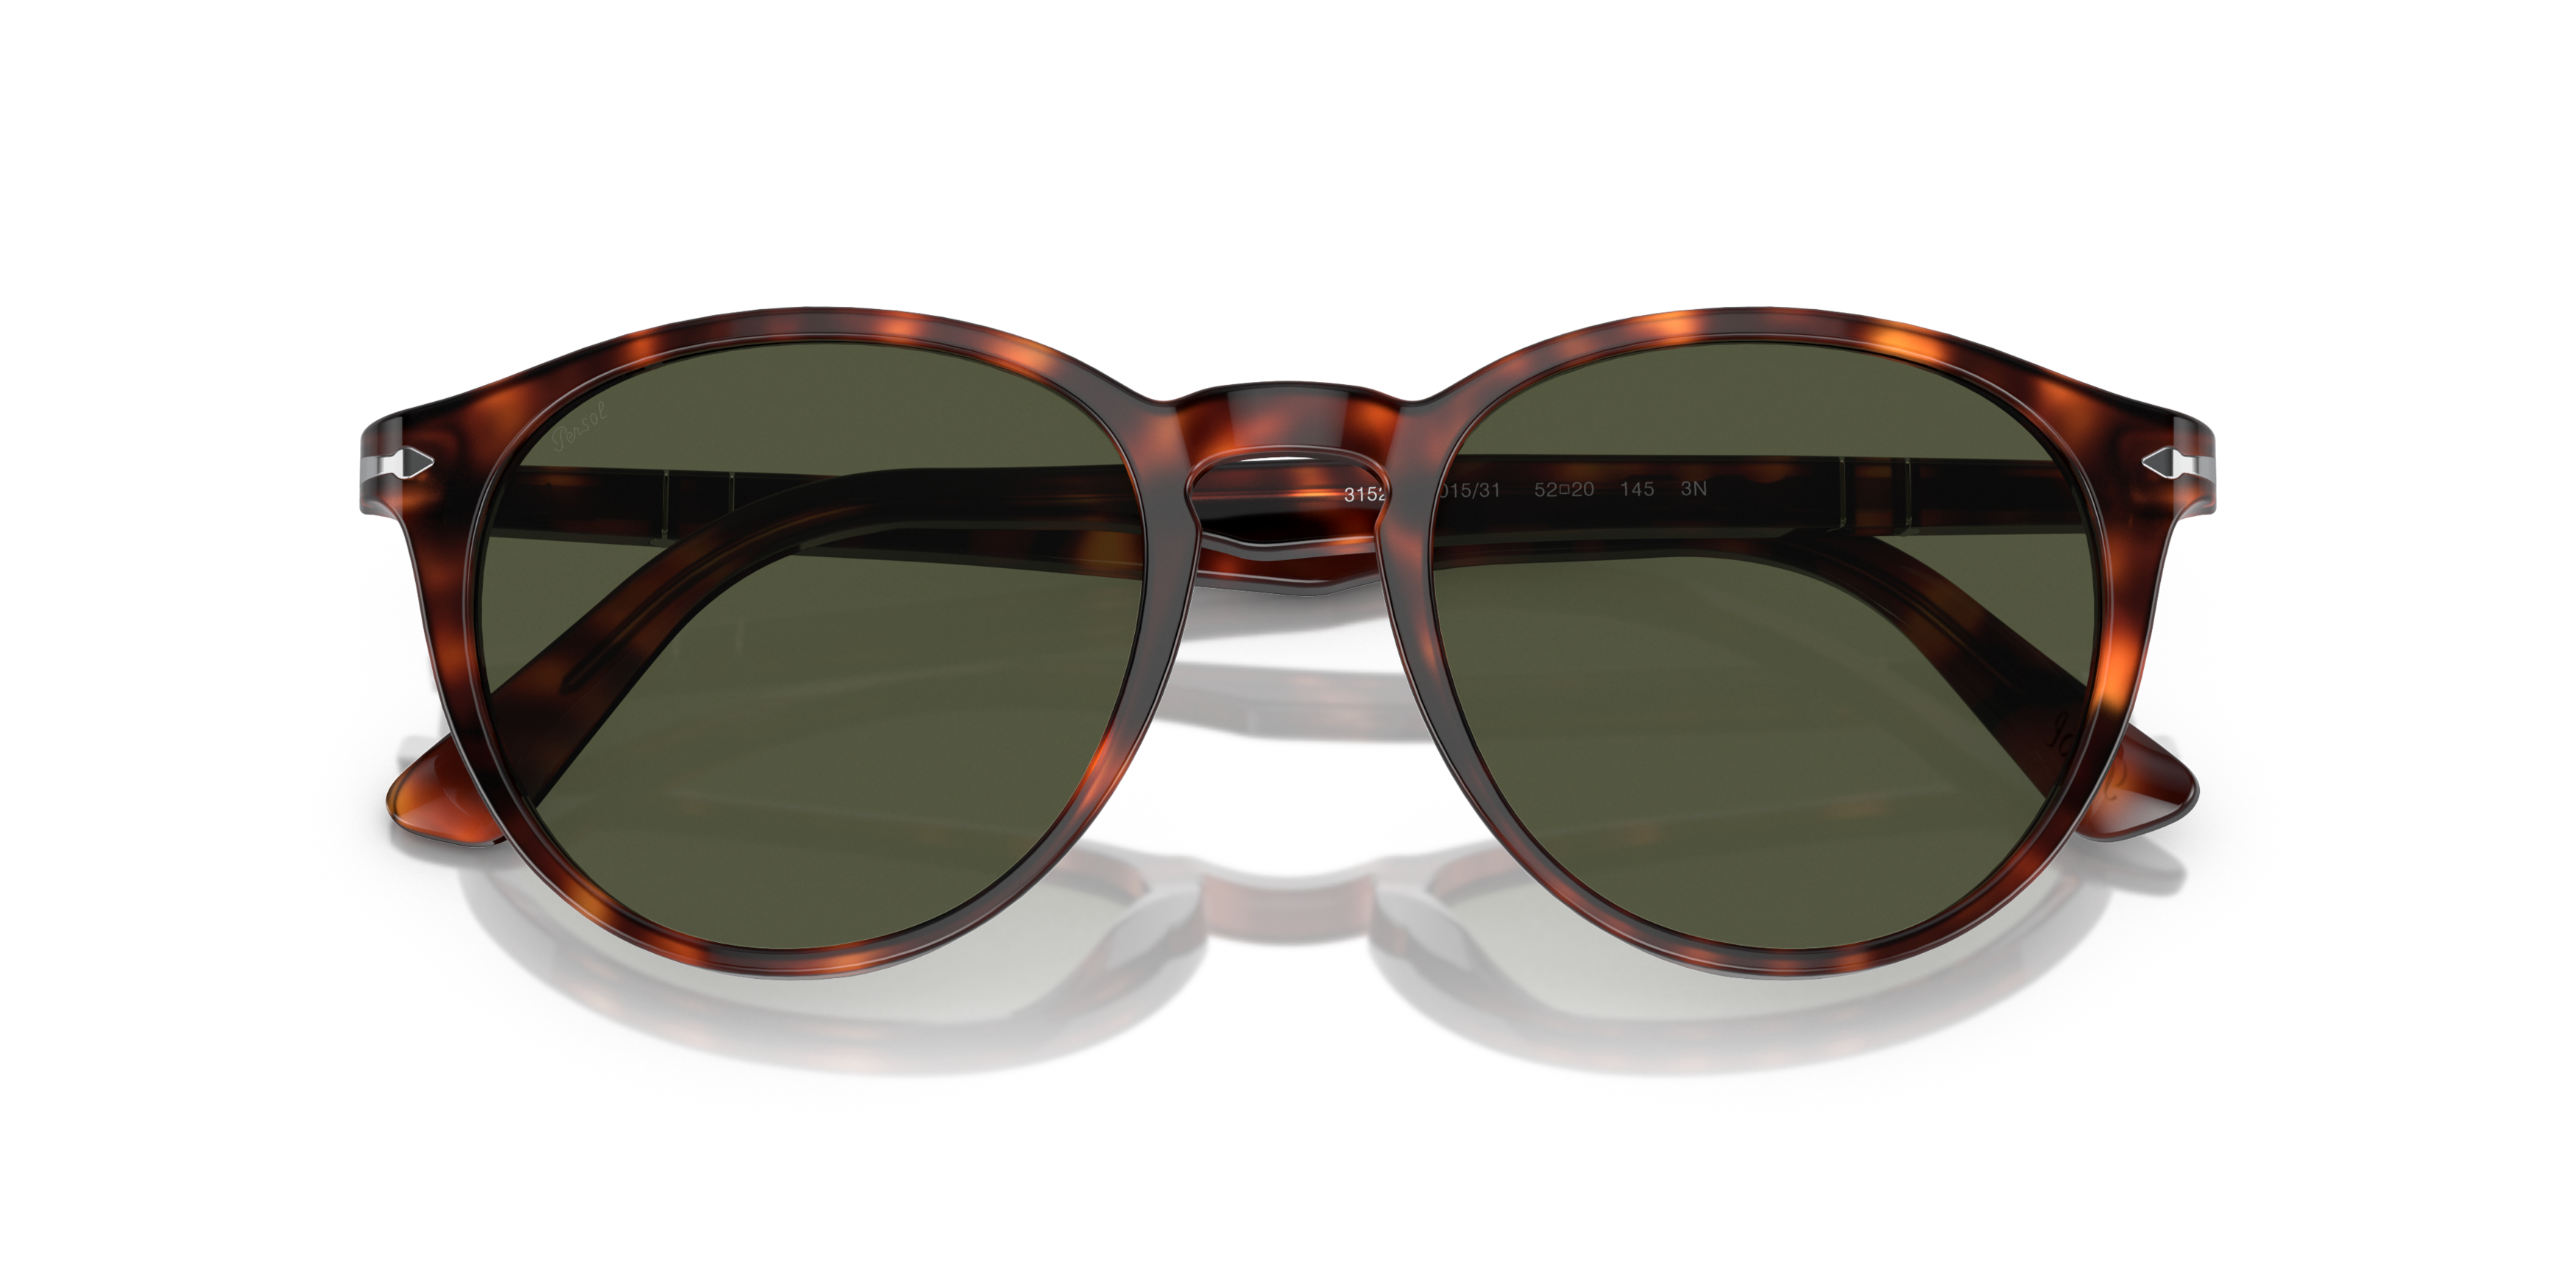 [products.image.folded] Persol 0PO3152S 901531